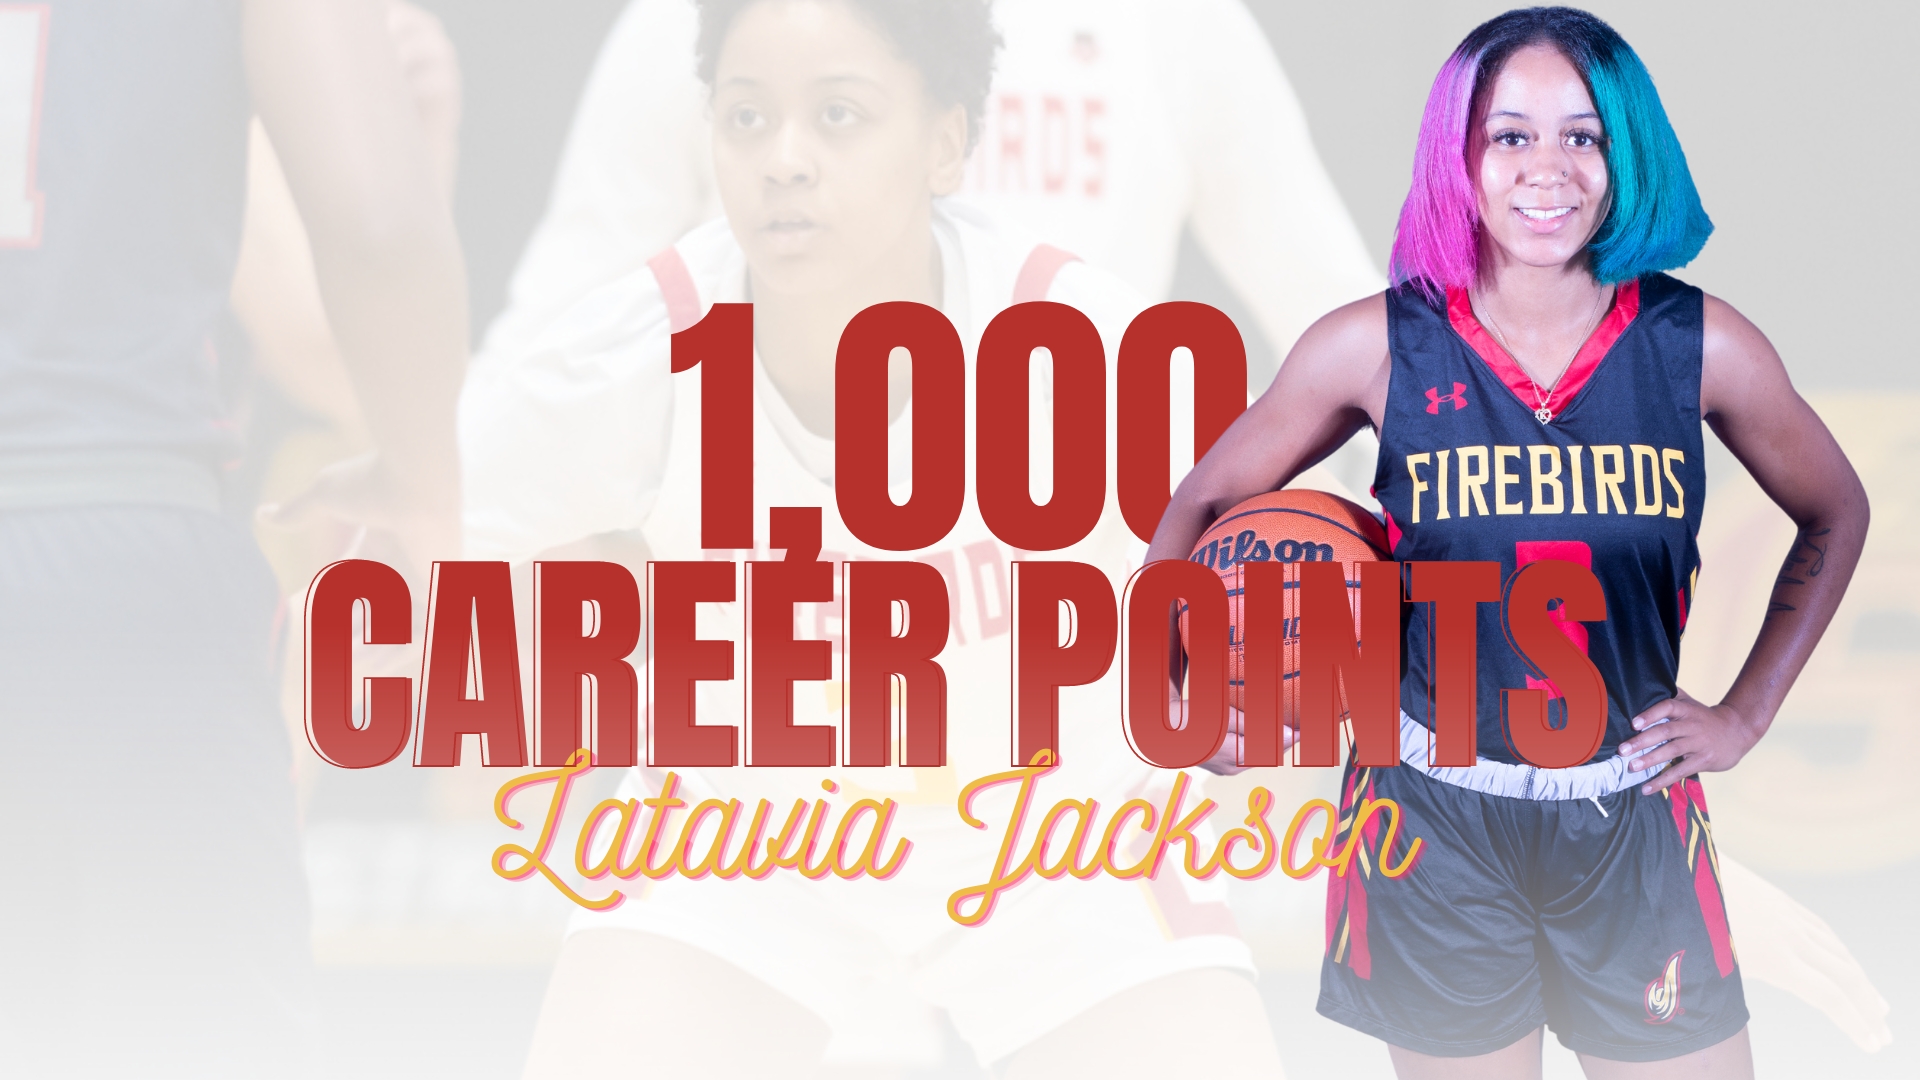 Latavia Jackson Hit's 1,000th Career Point in Firebirds Defeat of the Lions